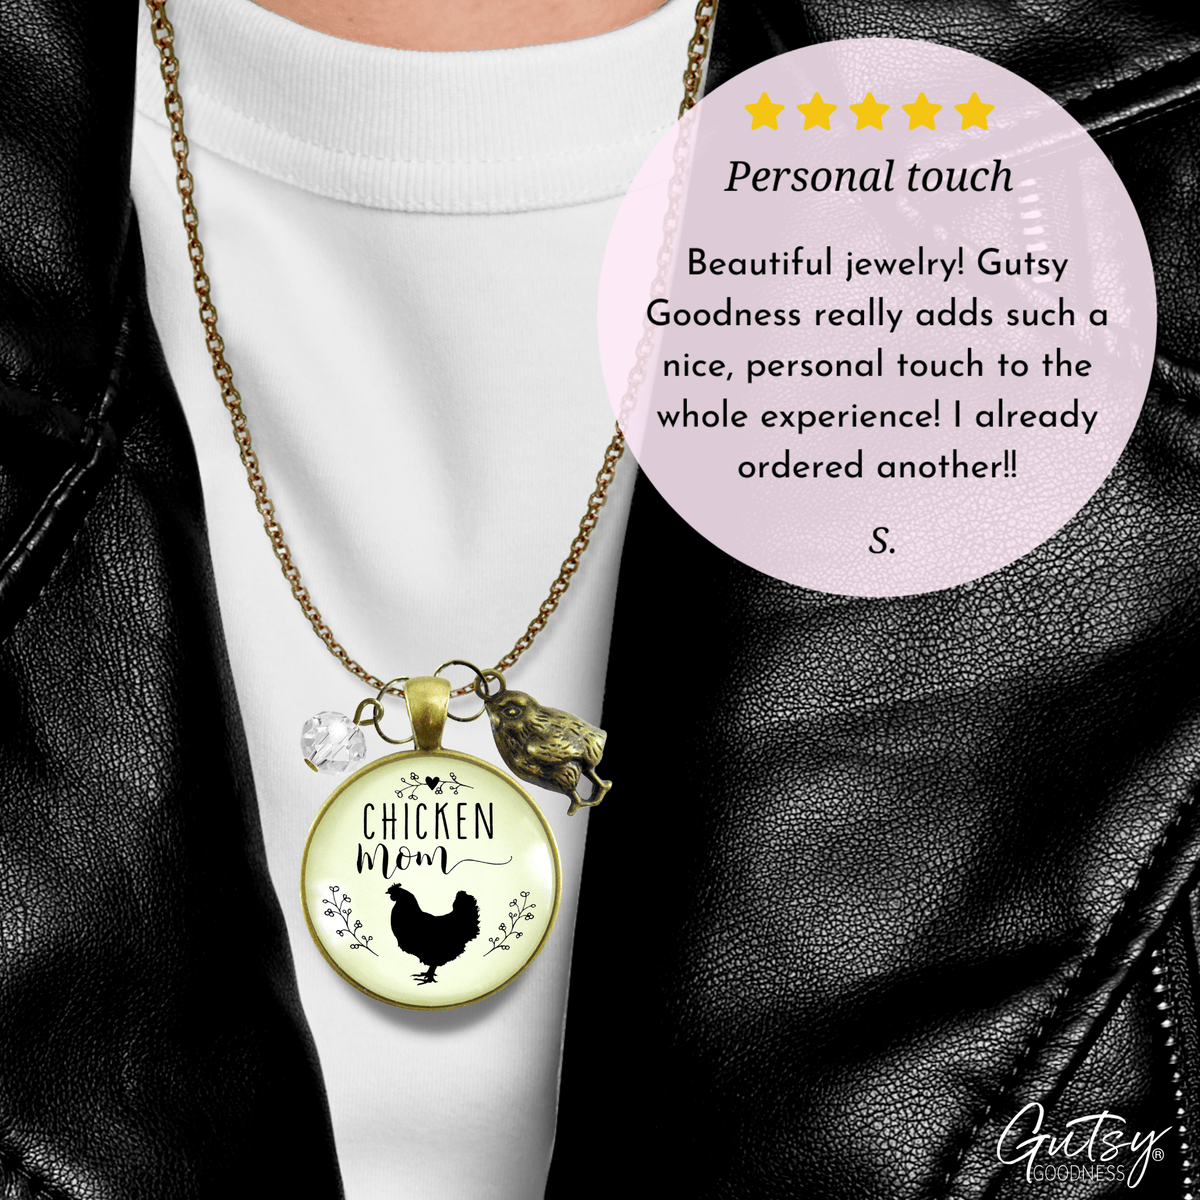 Gutsy Goodness Chicken Mom Necklace Farm Life Words Baby Chick Charm Gift Jewelry - Gutsy Goodness Handmade Jewelry;Chicken Mom Necklace Farm Life Words Baby Chick Charm Gift Jewelry - Gutsy Goodness Handmade Jewelry Gifts